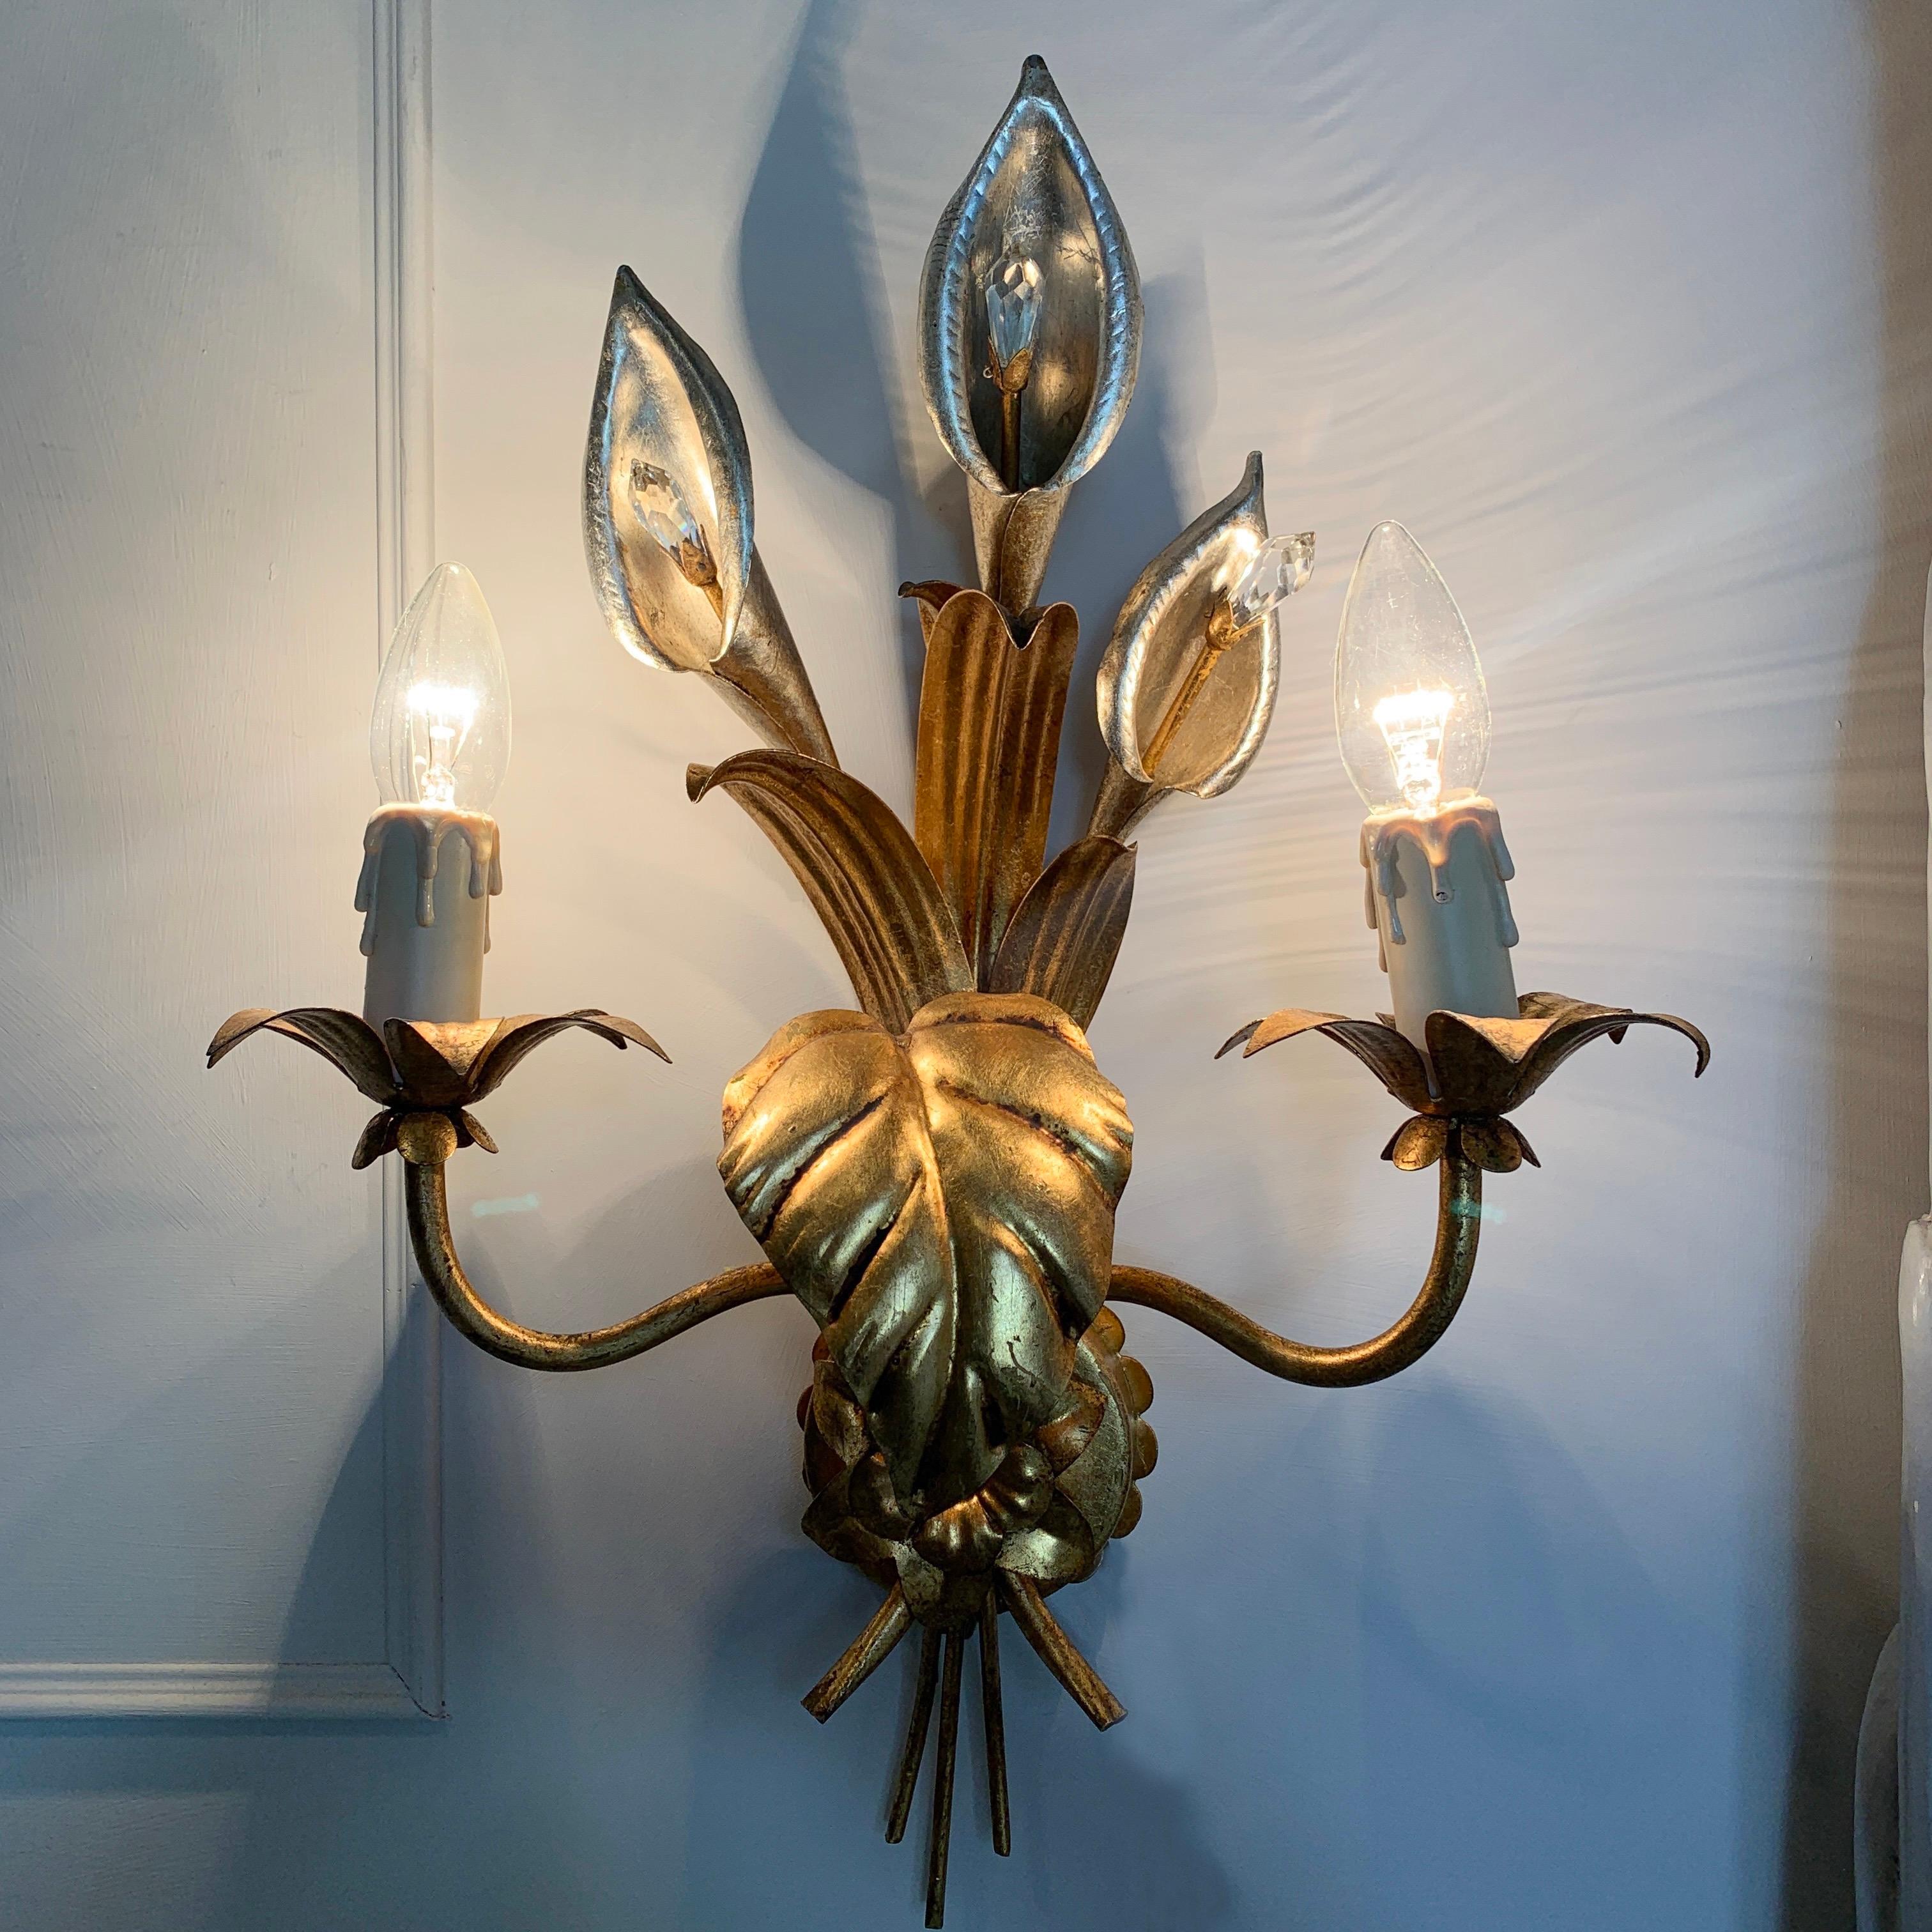 Pair of Hans Kögl calla lily wall sconces, c 1970's
Stunning silver and gilt calla lily flower design

Each silver calla lily has a central faceted Swarovski crystal stamen
There are 2 bulb holders with faux candle covers

Large and slim calla